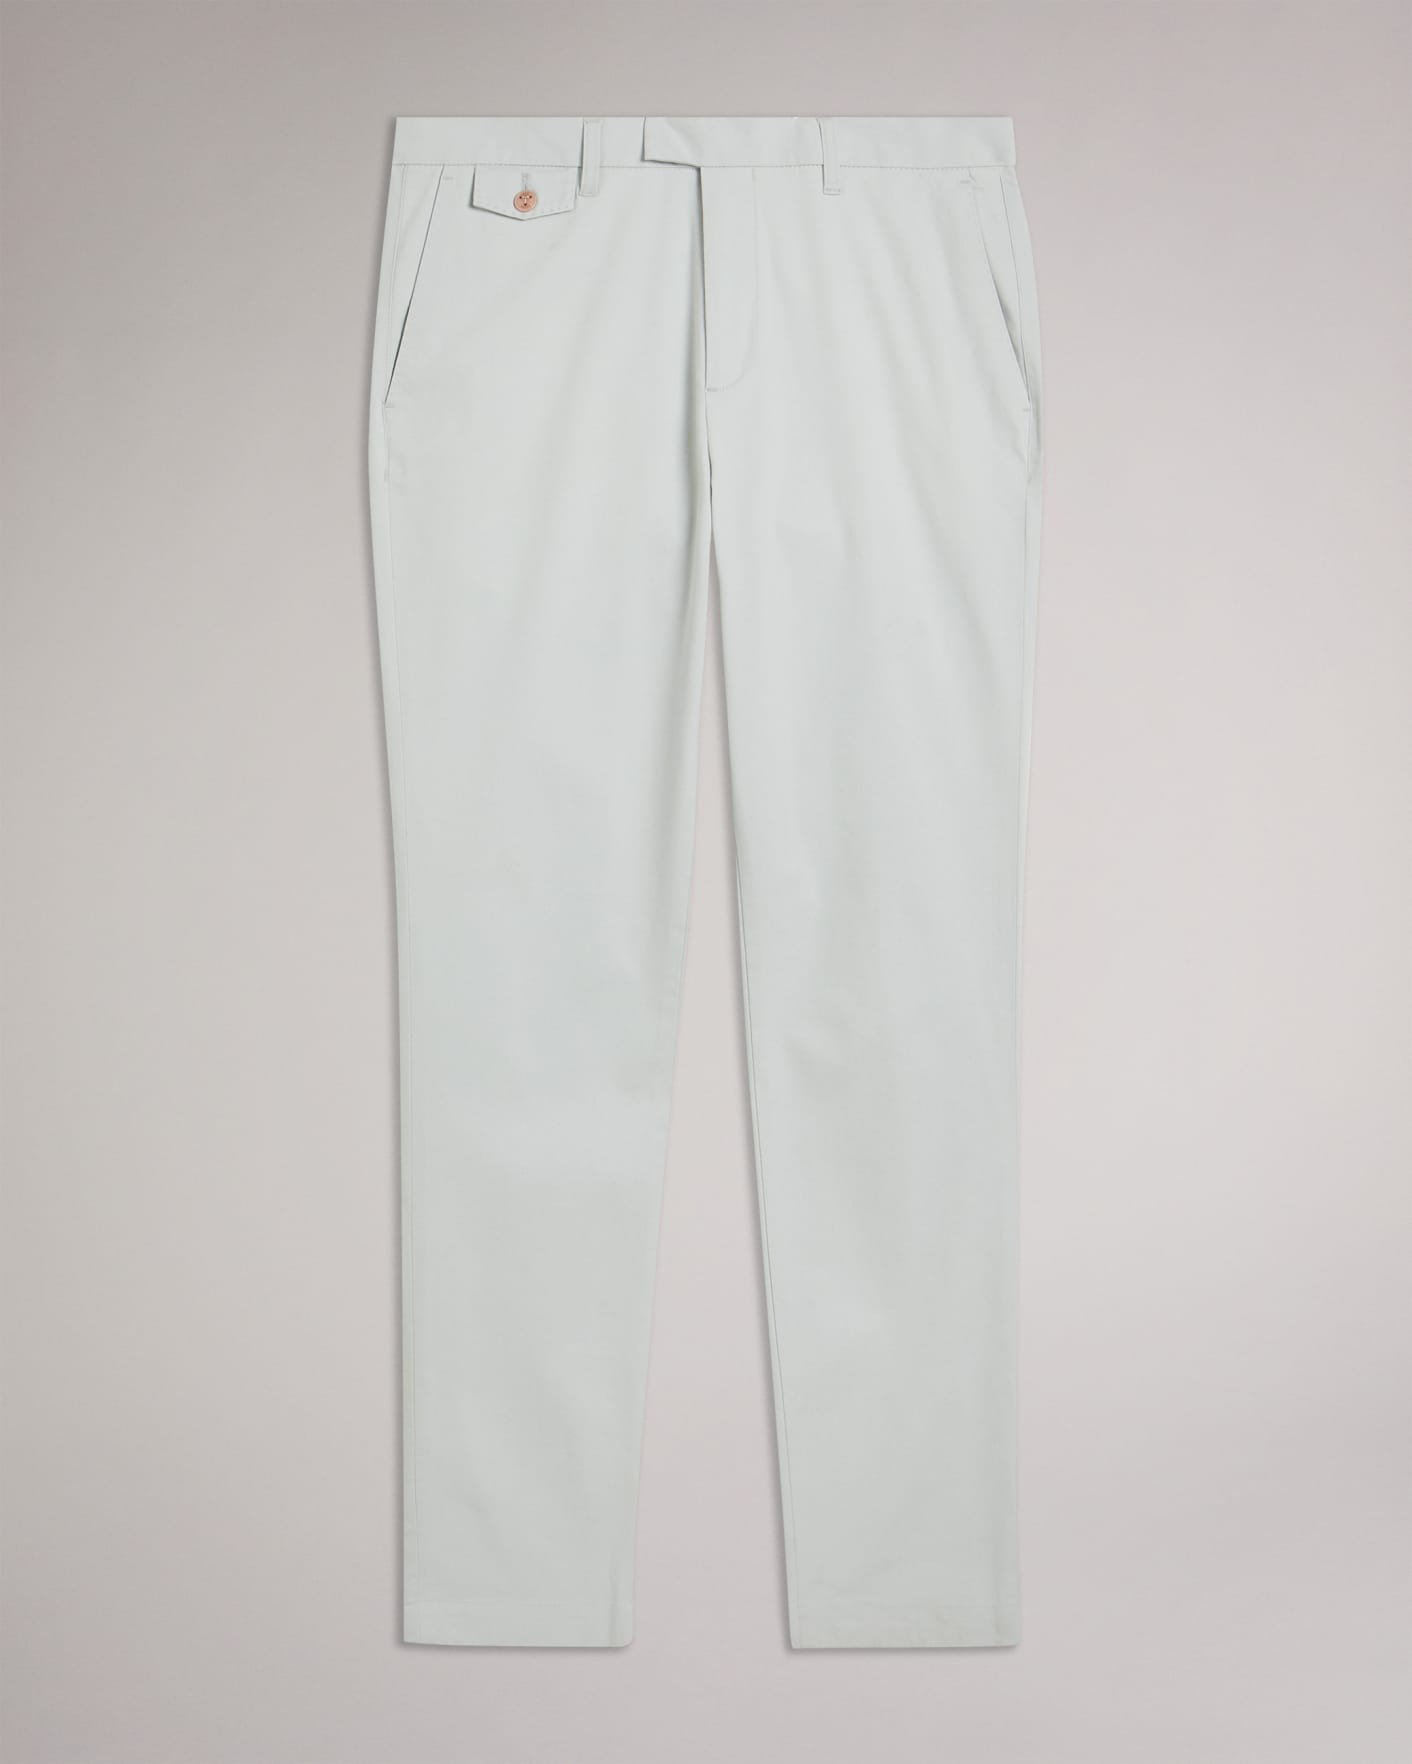 Gris clair Chino slim coupe Irvine Ted Baker